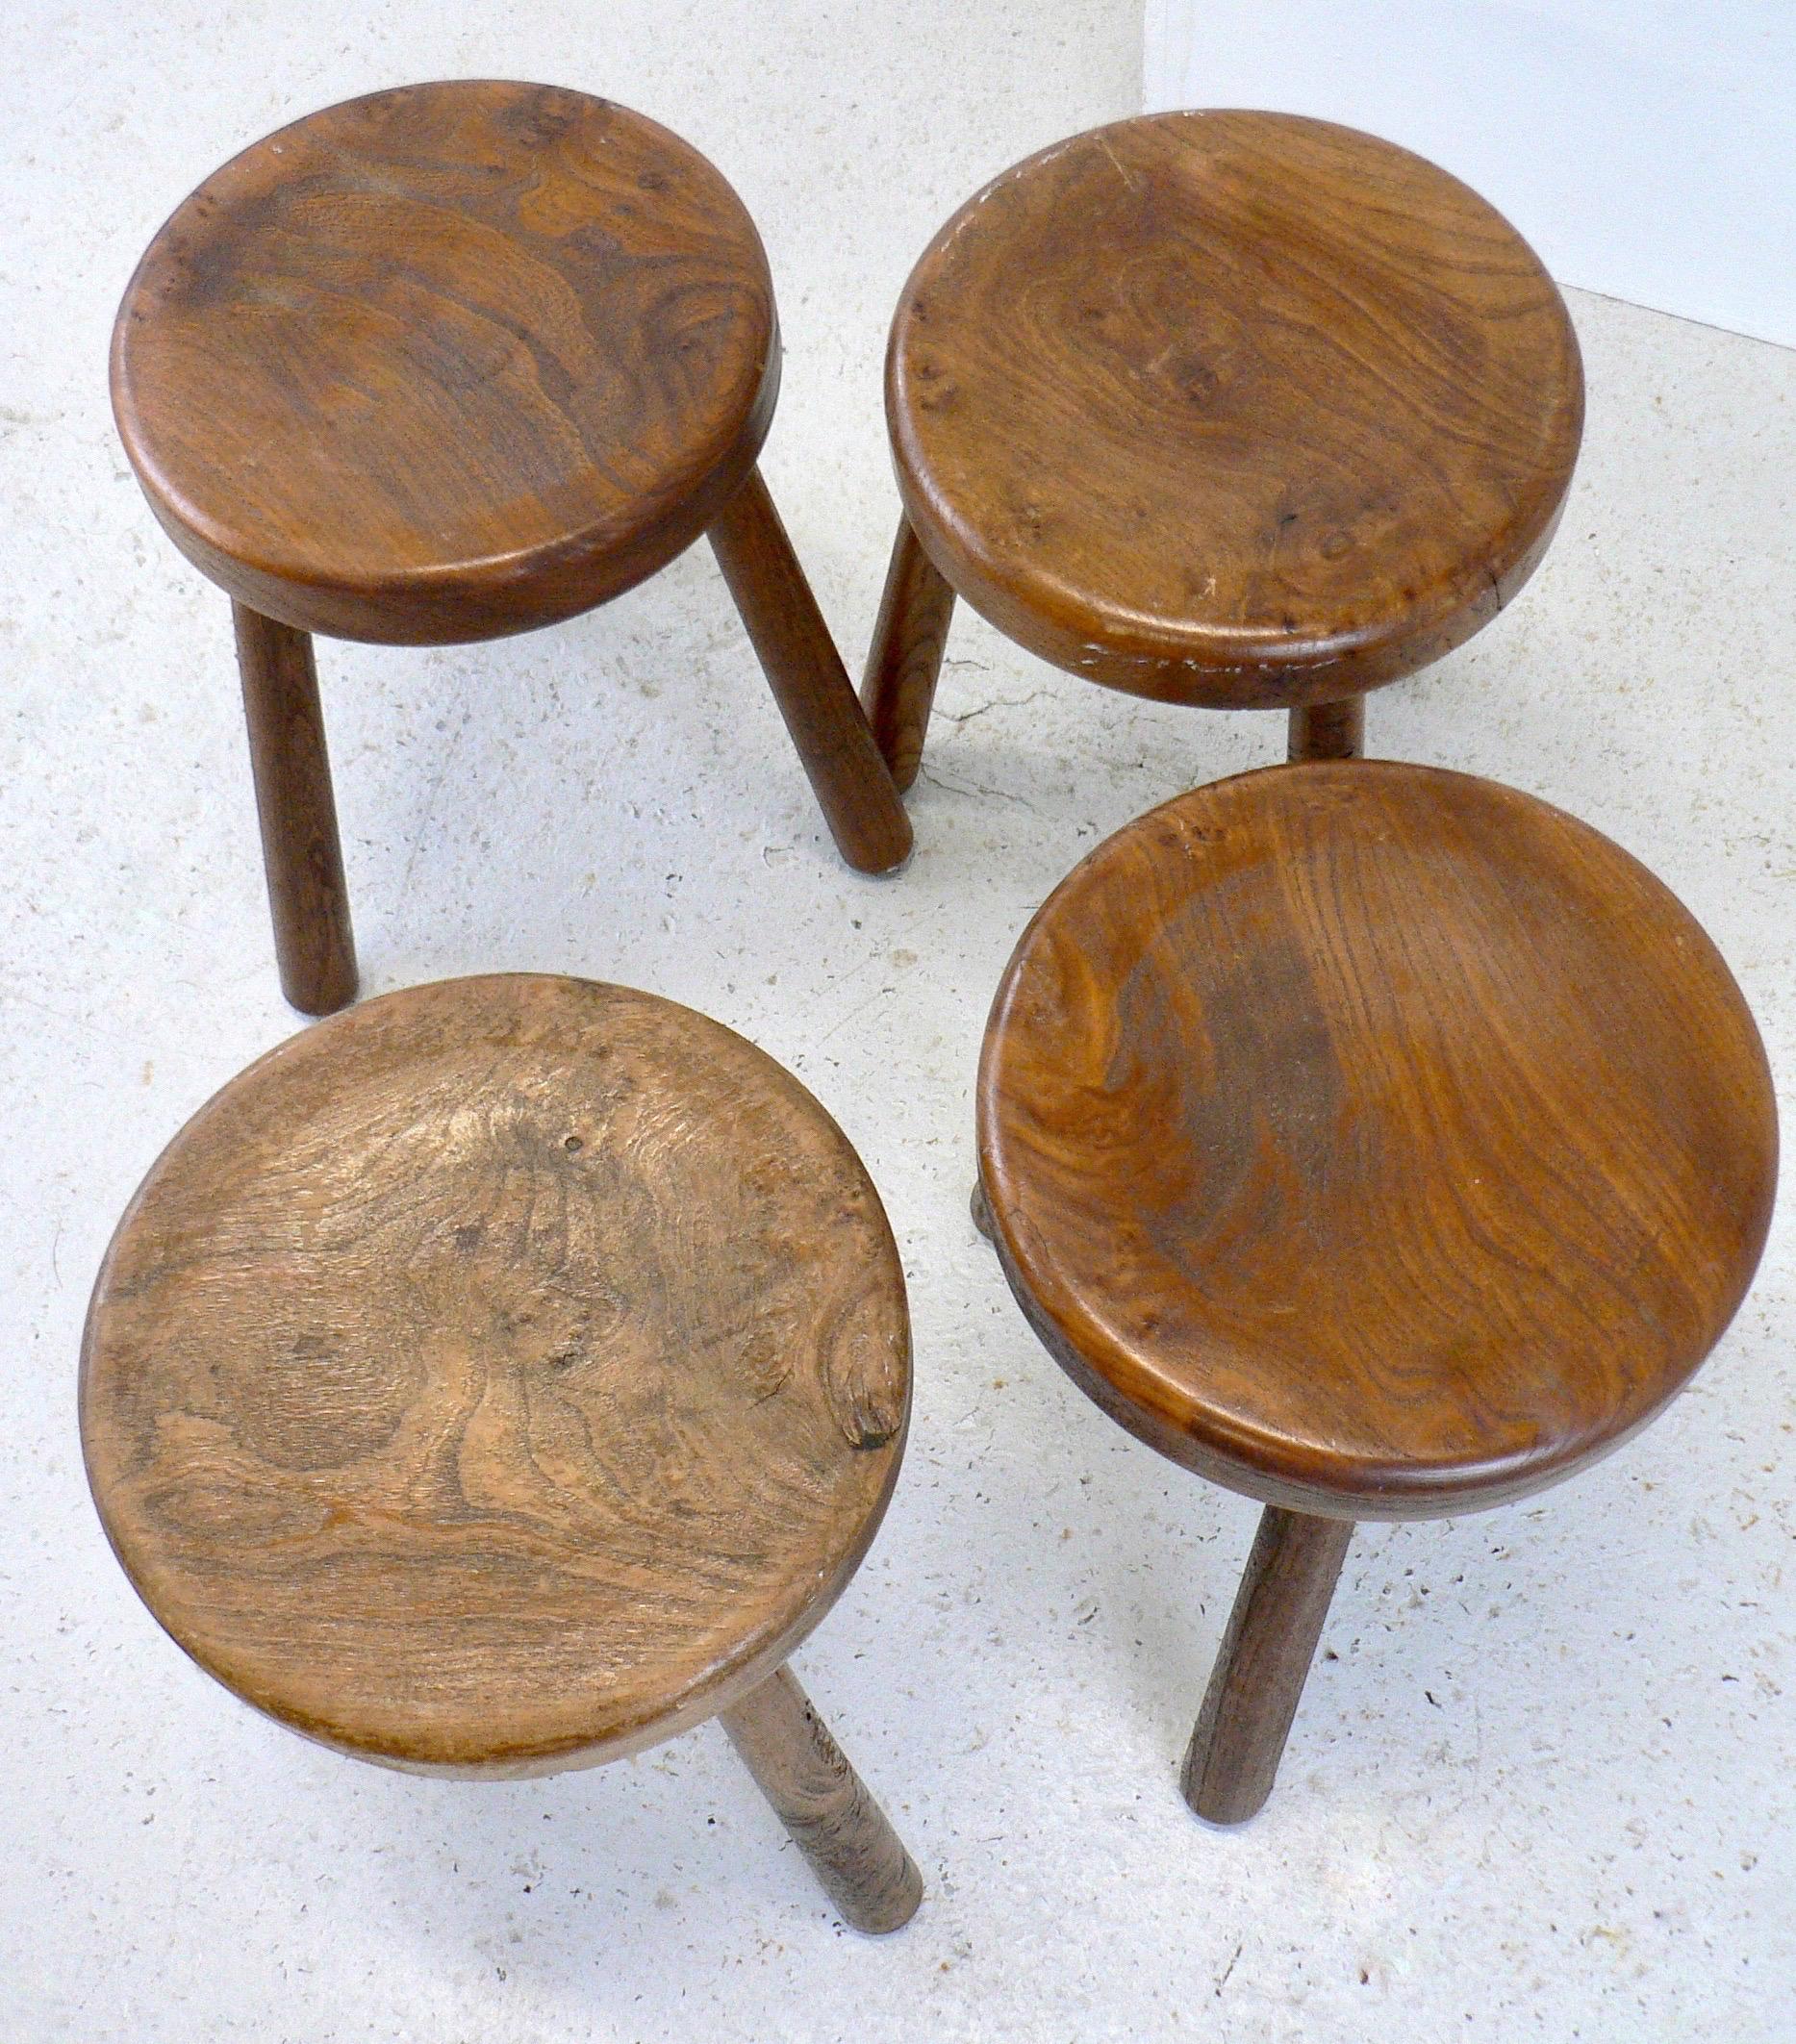 A set of four tripod 'shepherd' stools in the style of Charlotte Perriand. French craftsmanship from the mid-20th century, featuring a beautiful patina.